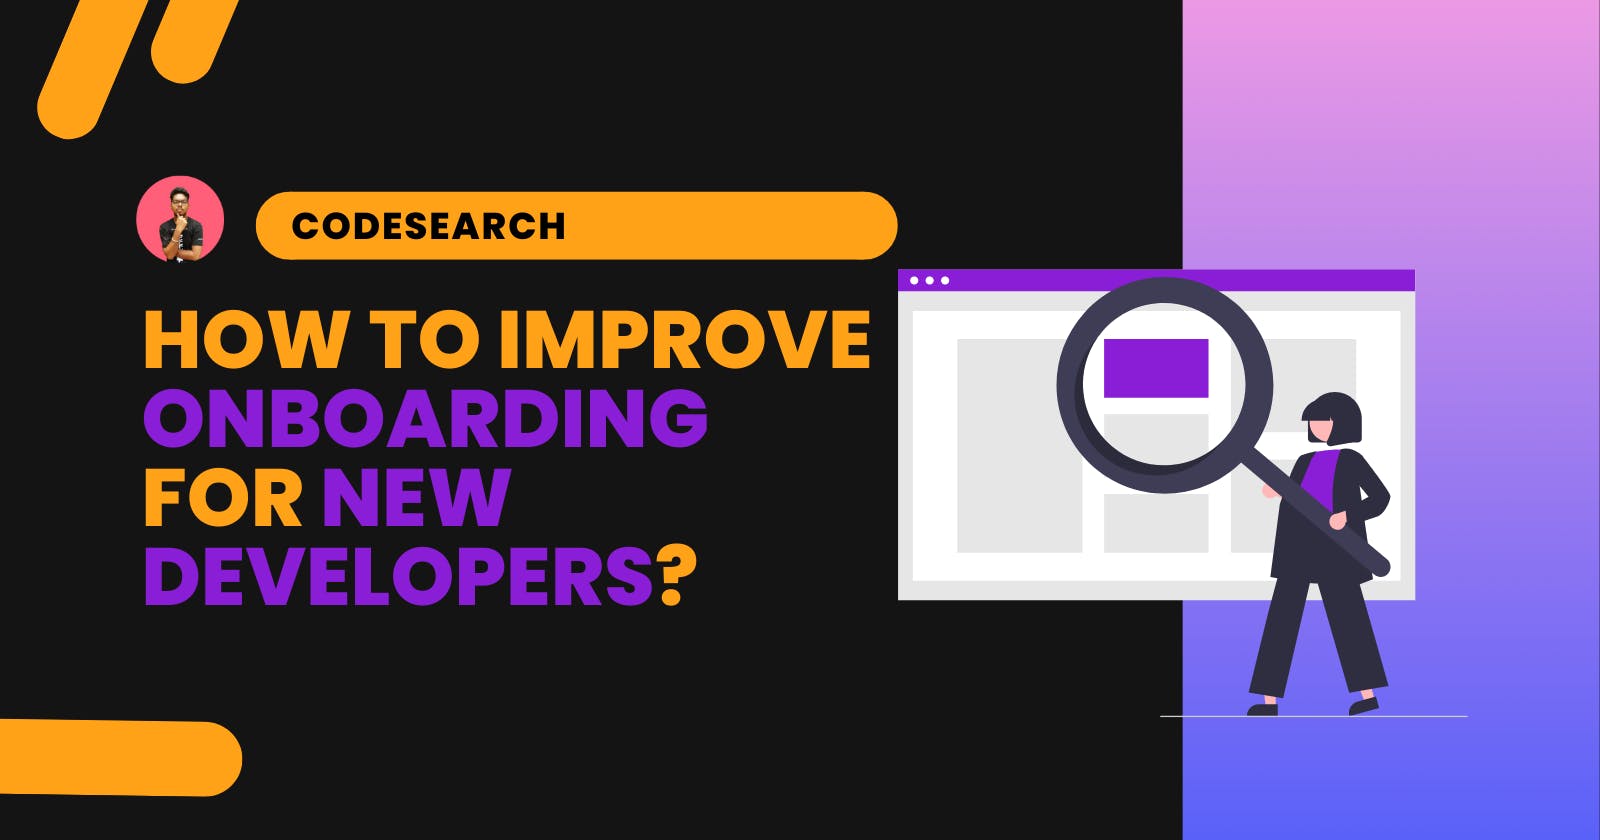 How Engineering managers can improve onboarding for new developers